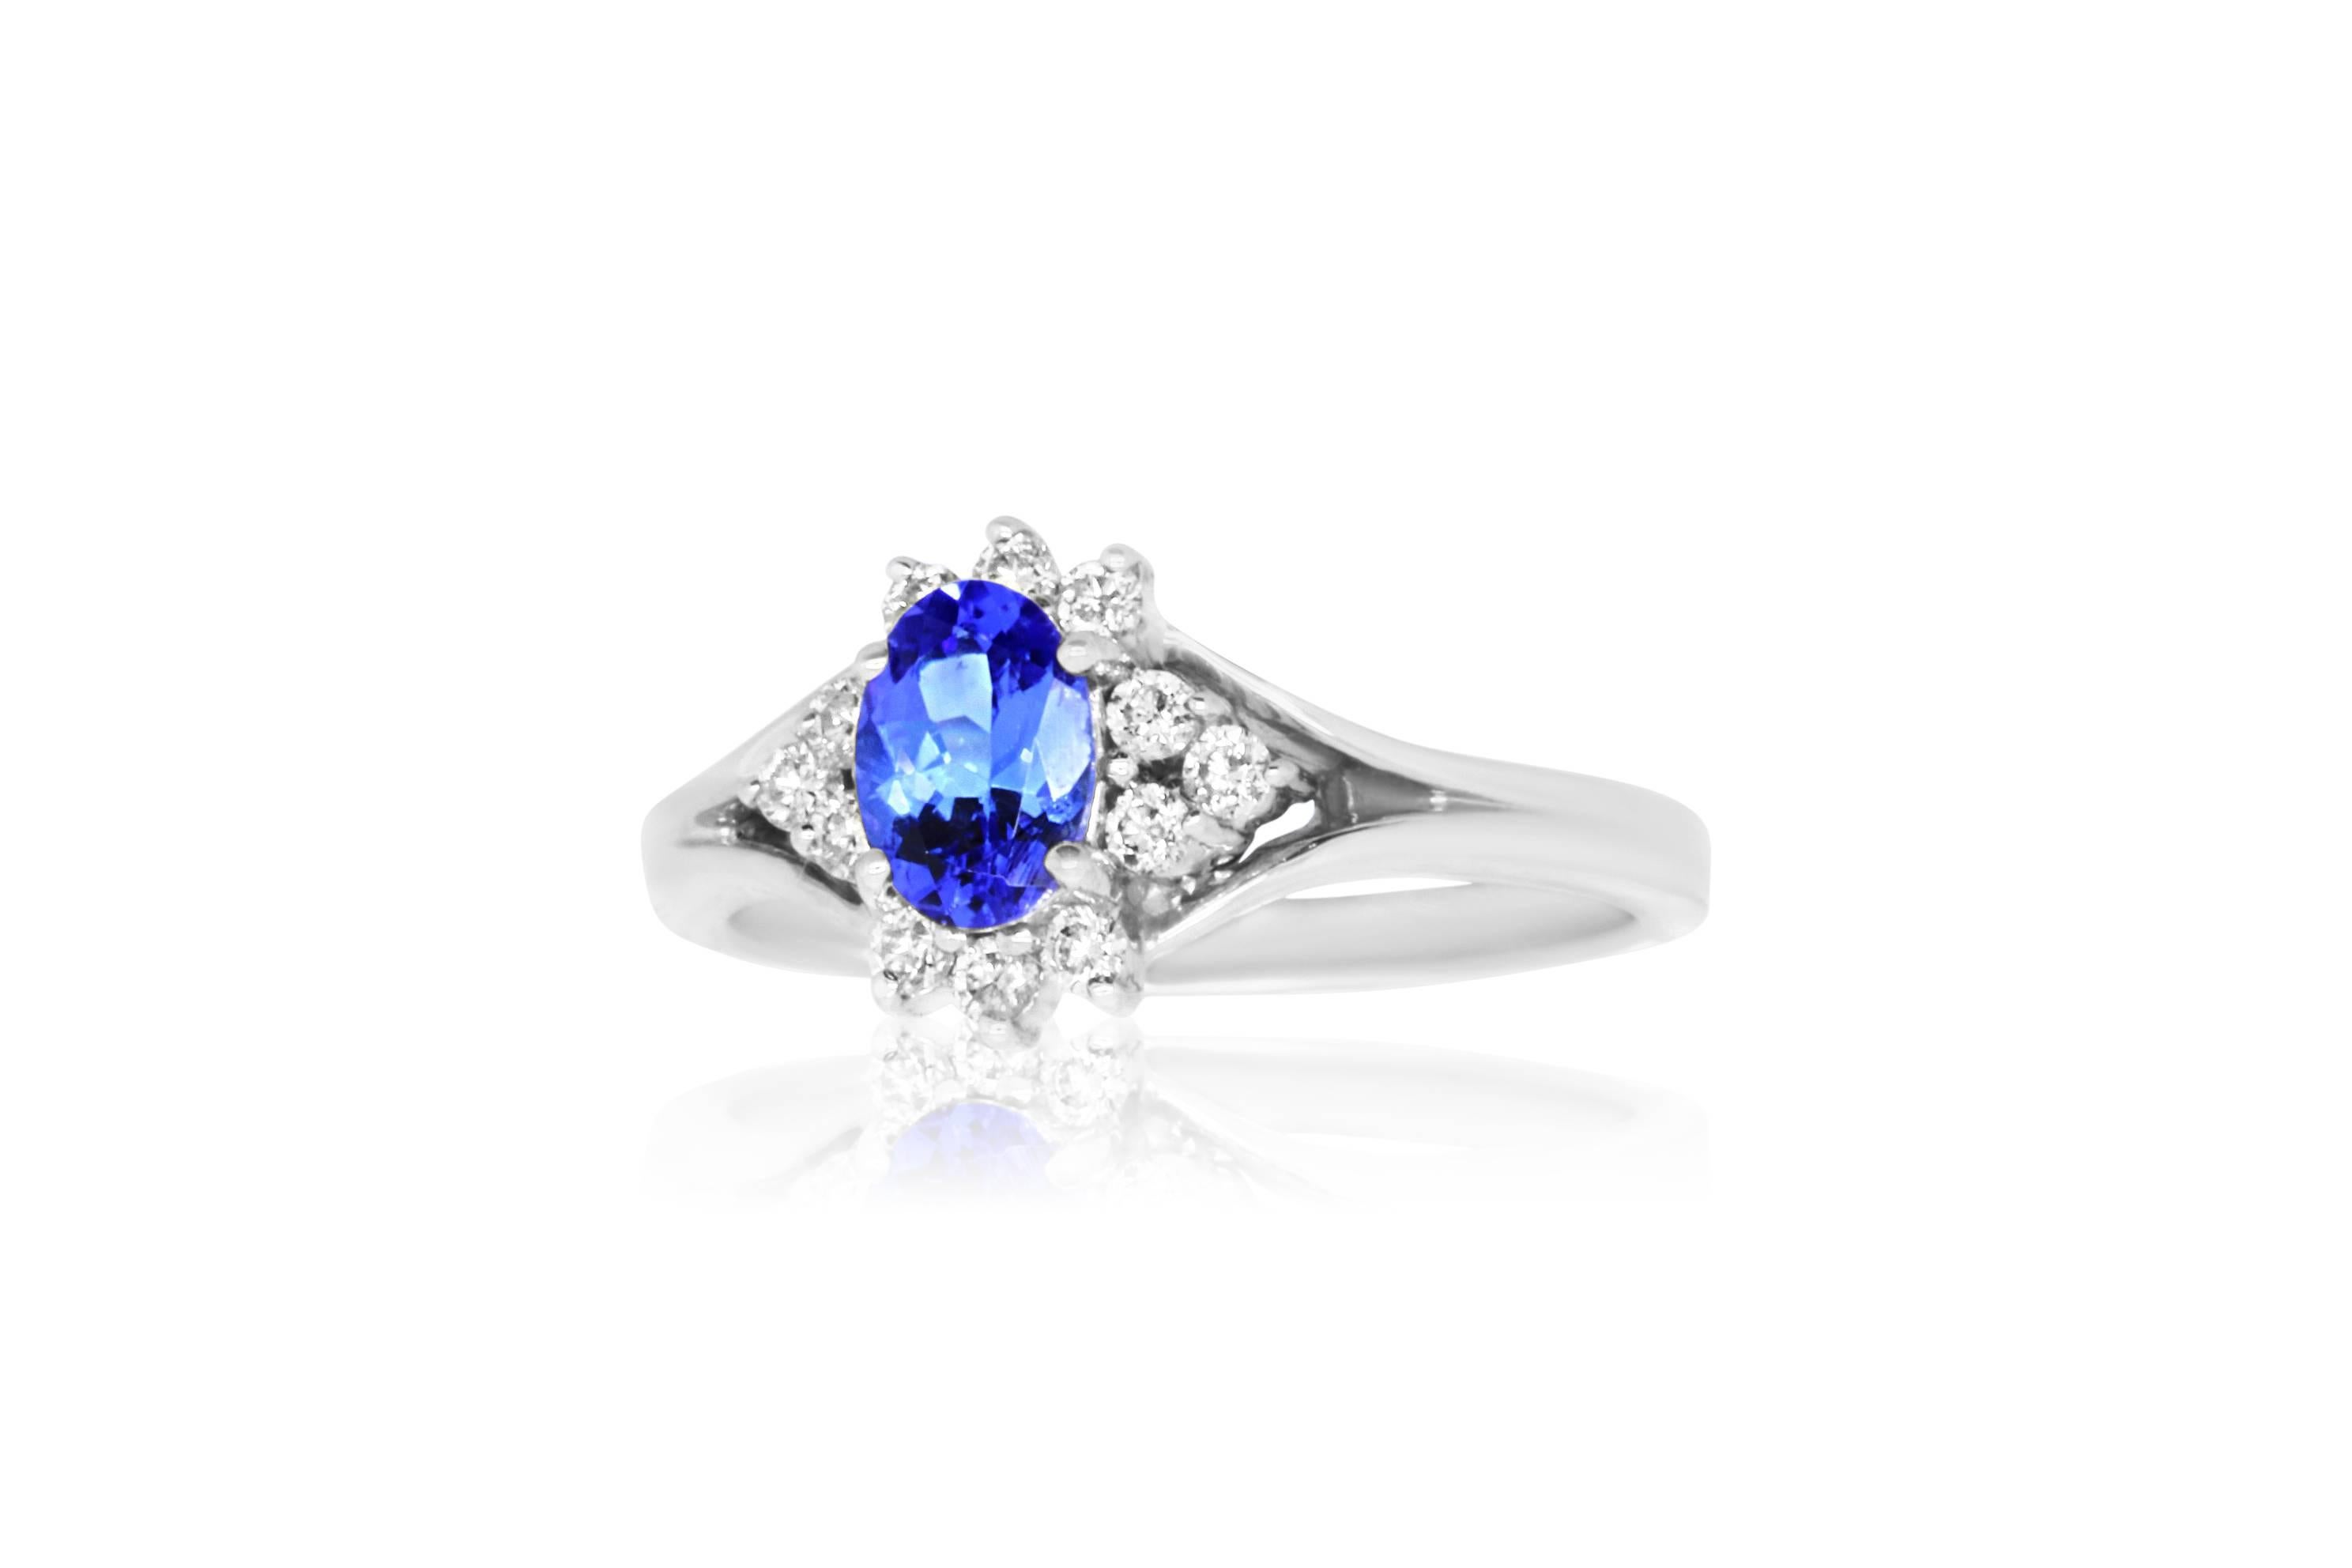 This ring is perfect for the colored jewelry lover. A stunning 0.75 Carat Oval shaped Tanzanite is framed by a snowflake made up of 0.22 Carats of White diamonds. A beautiful blend of classic and chic.

Material: 14k White Gold
Gemstones: 1 Oval